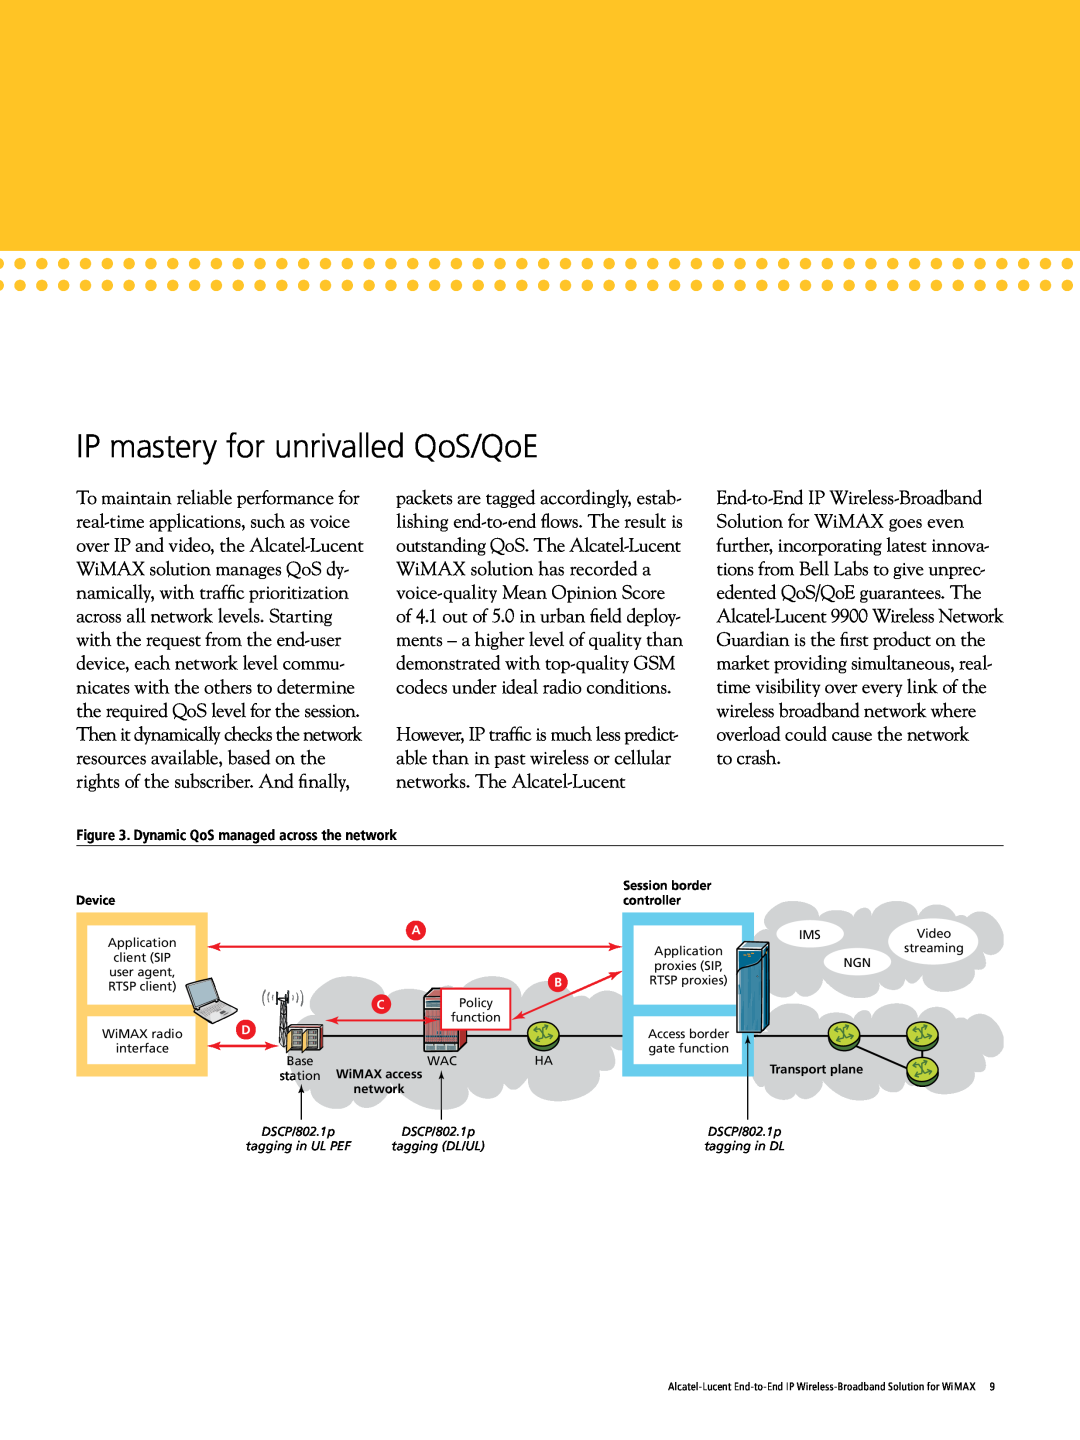 Alcatel-Lucent WiMAX manual IP mastery for unrivalled QoS/QoE, to crash 